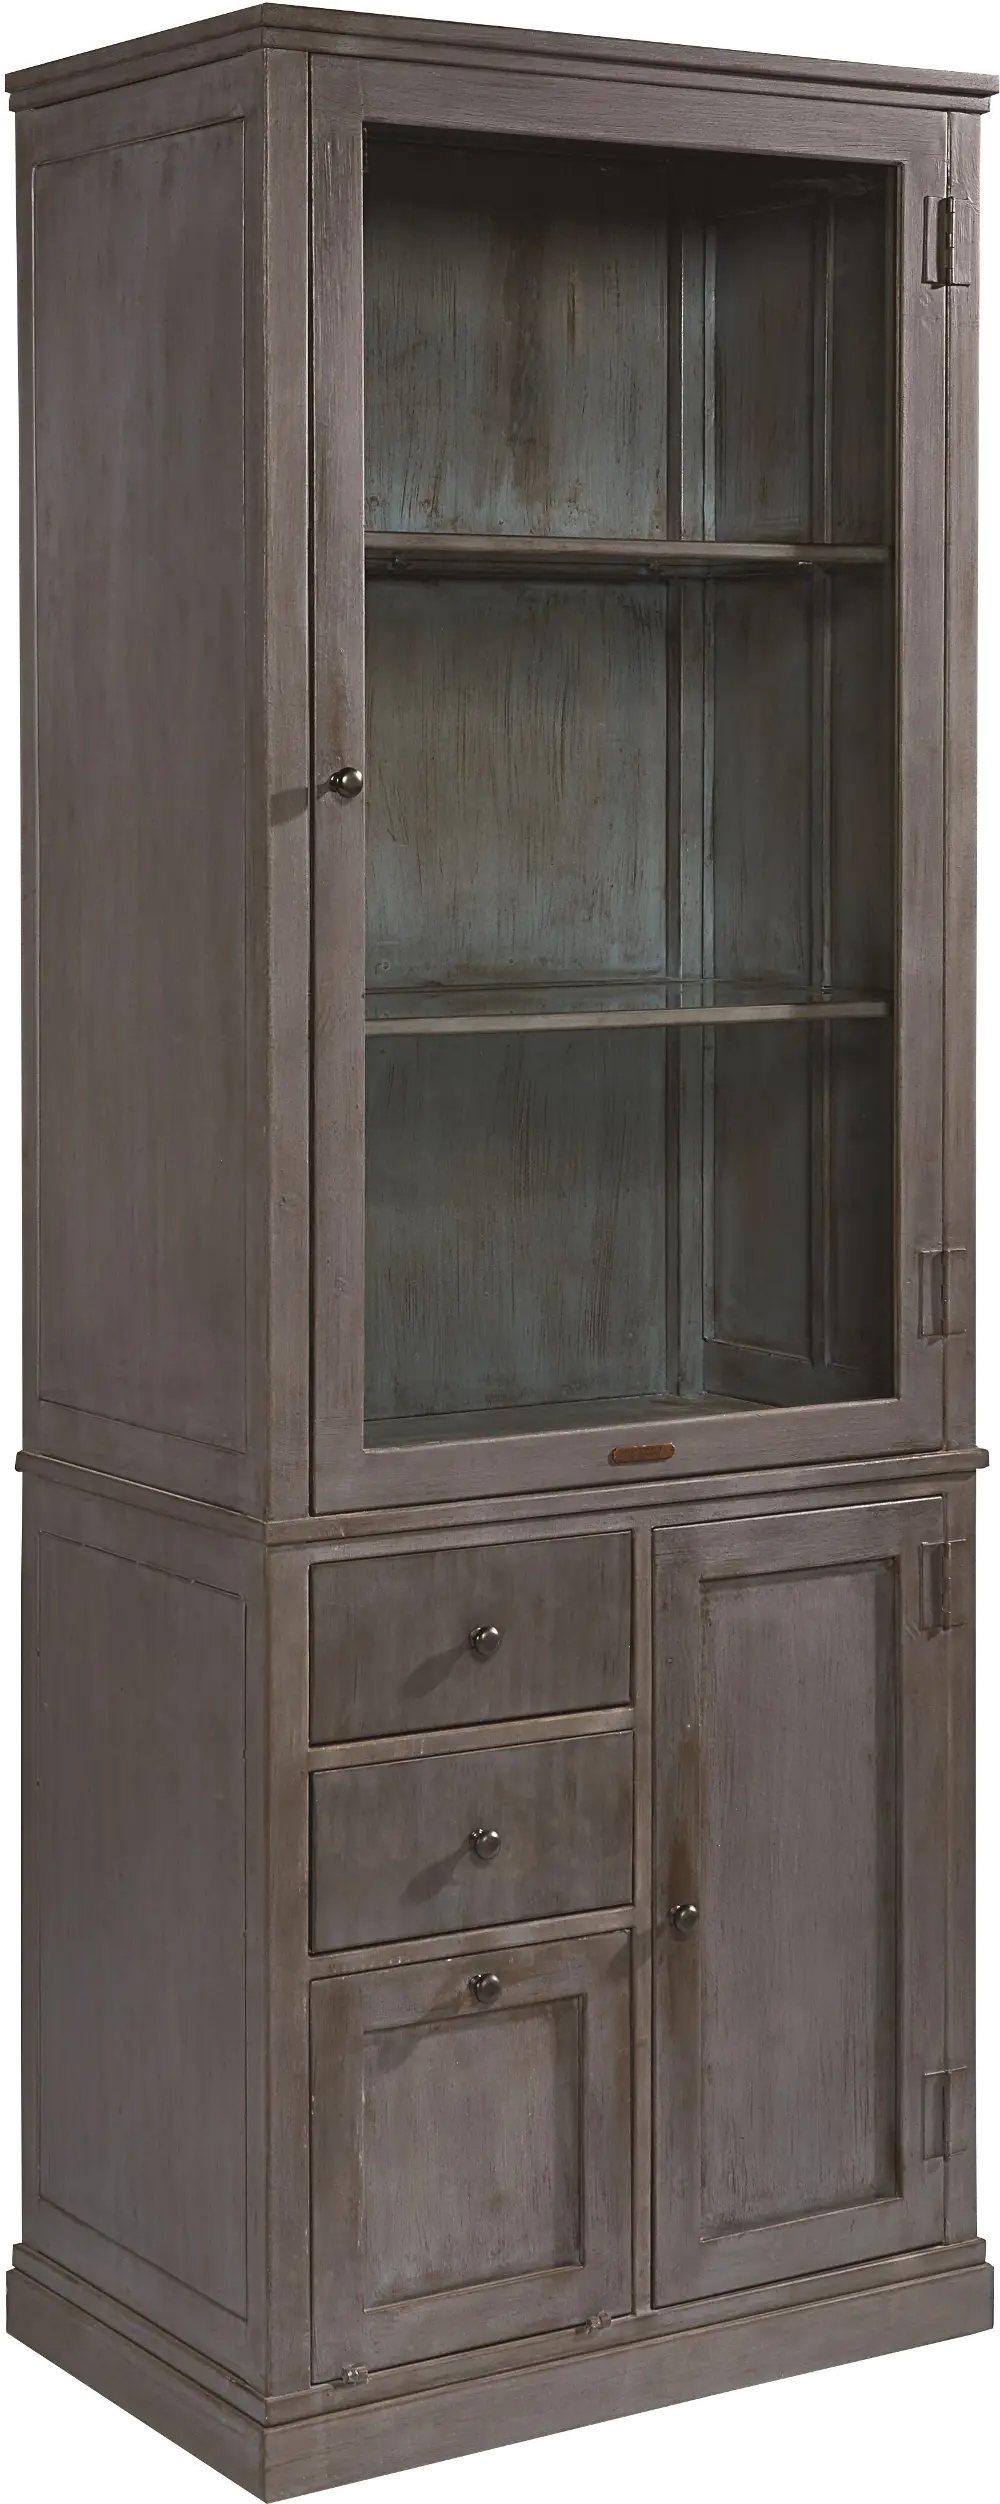 Elements Gray Apothecary Metal Cabinet -1